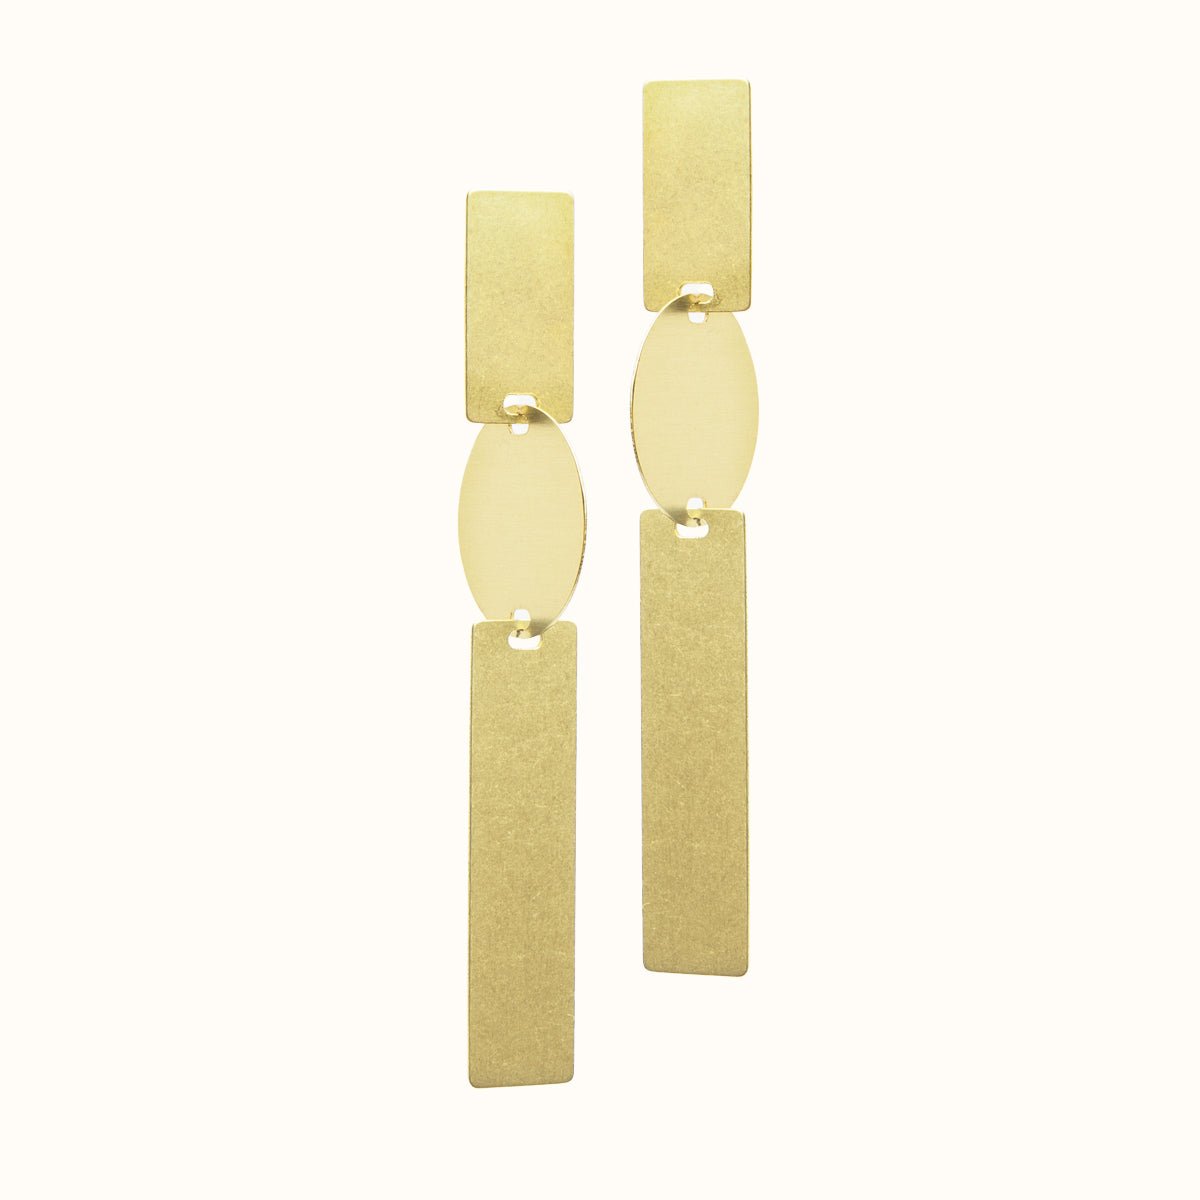 A long brass earring made with two rectangular pieces interconnected with a single circular shape. Designed and handcrafted in Portland, Oregon.